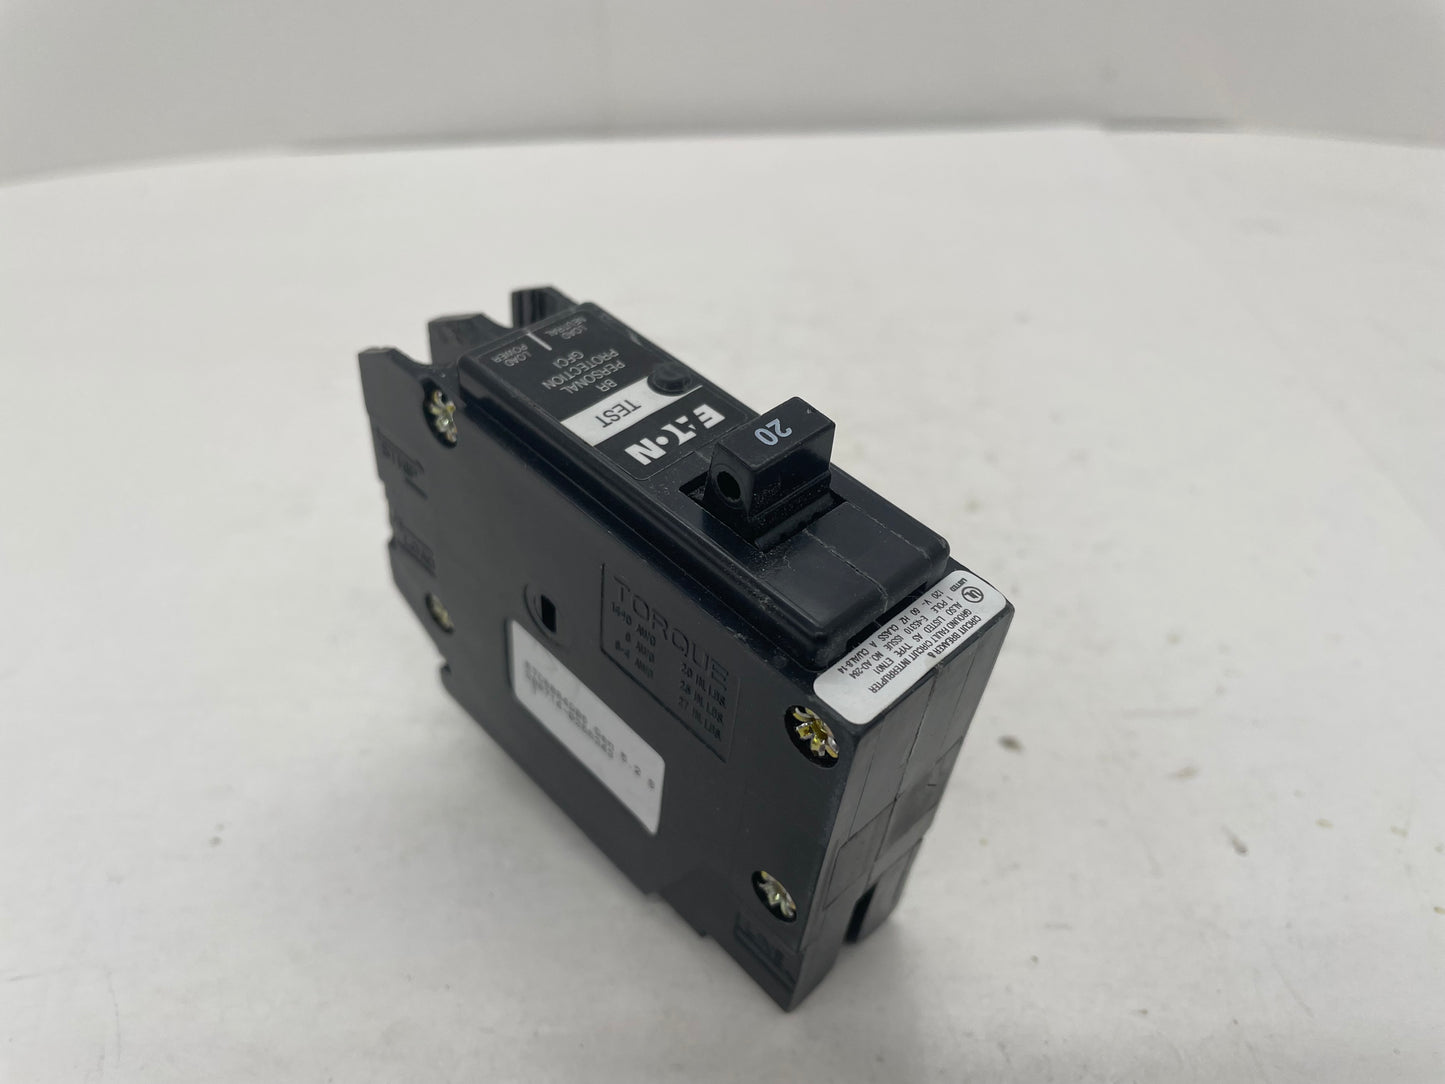 Eaton BRP120GF Circuit Breaker 20A 1P 120V 10 kAIC Type BR Ground Fault - Reconditioned